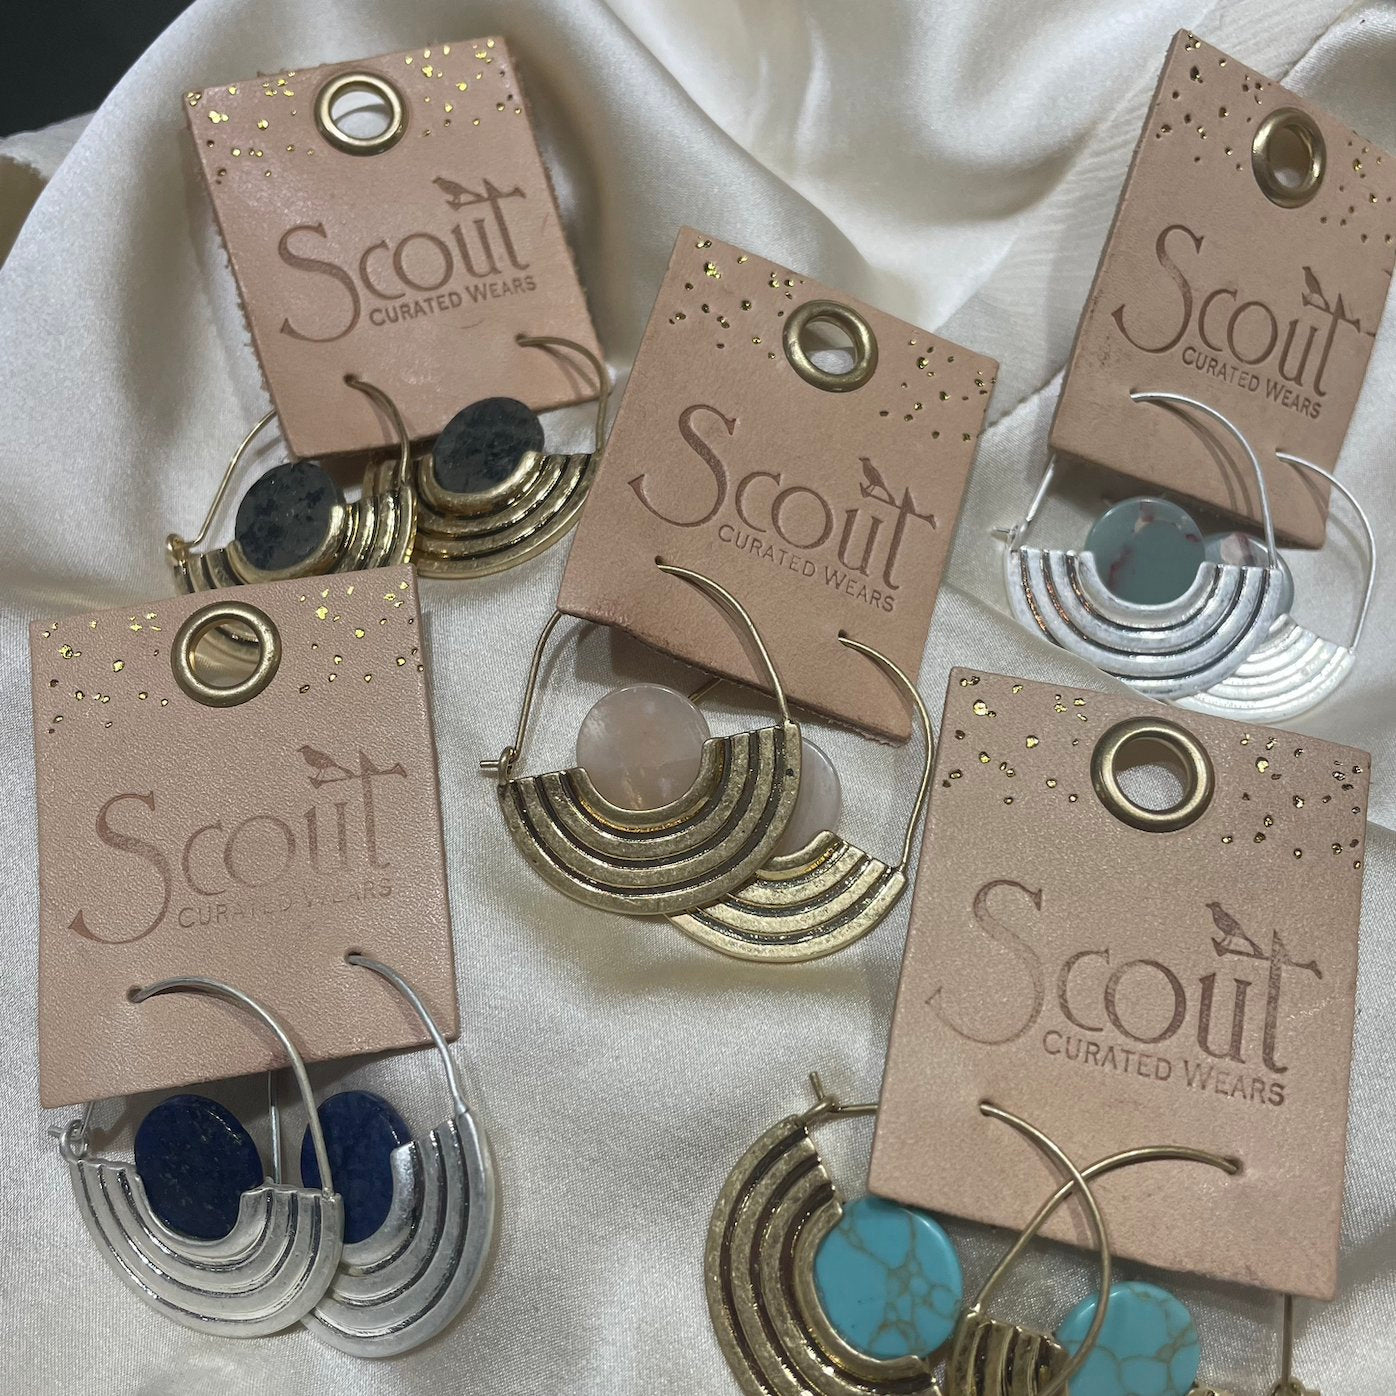 Scout Curated Wears Bracelet or Necklace Wraps 